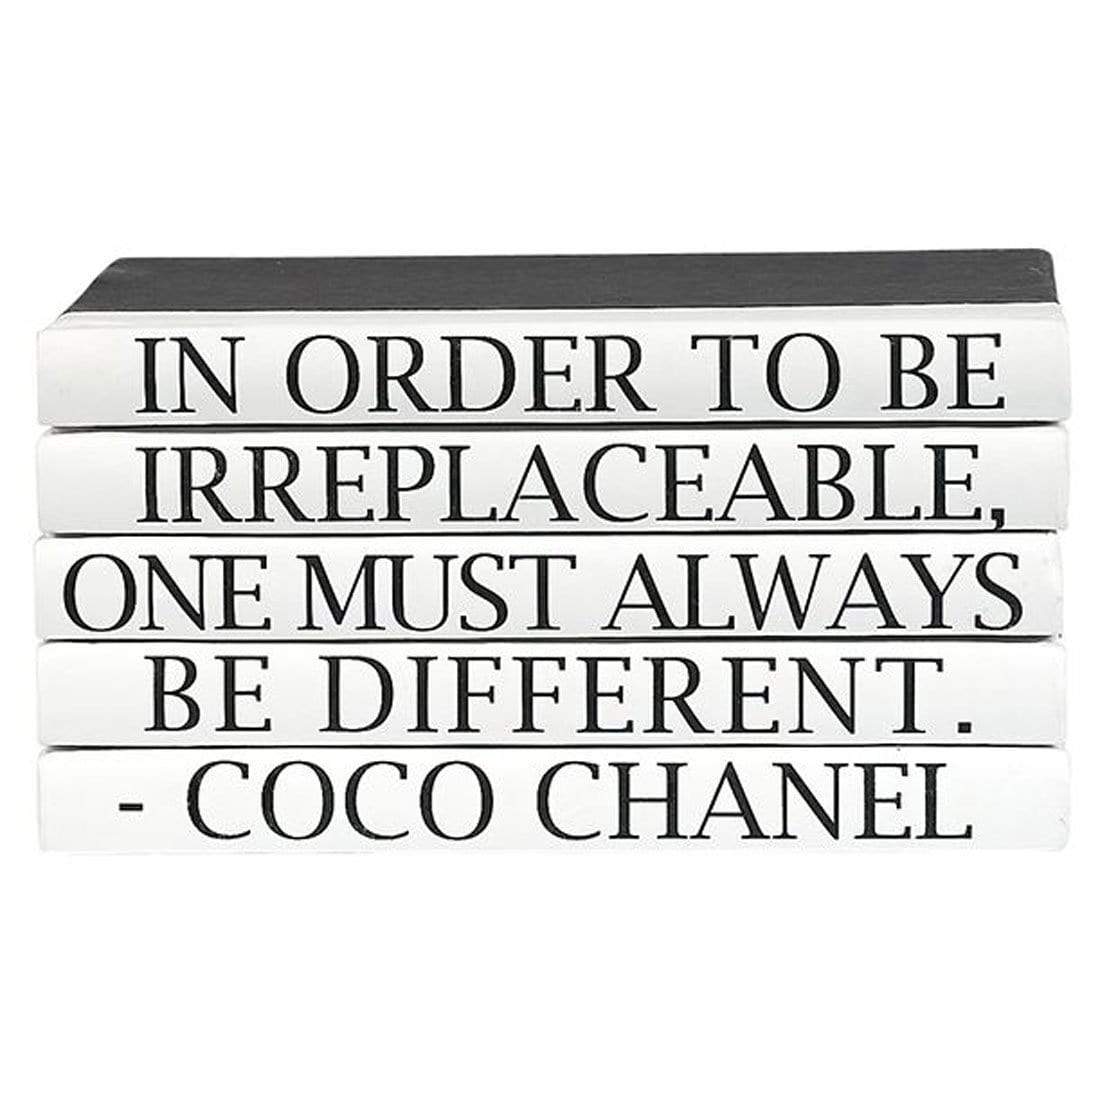 6 Vol. You can be Coco Chanel Quote / Black Covers / 9.5 - E  Lawrence, LTD.